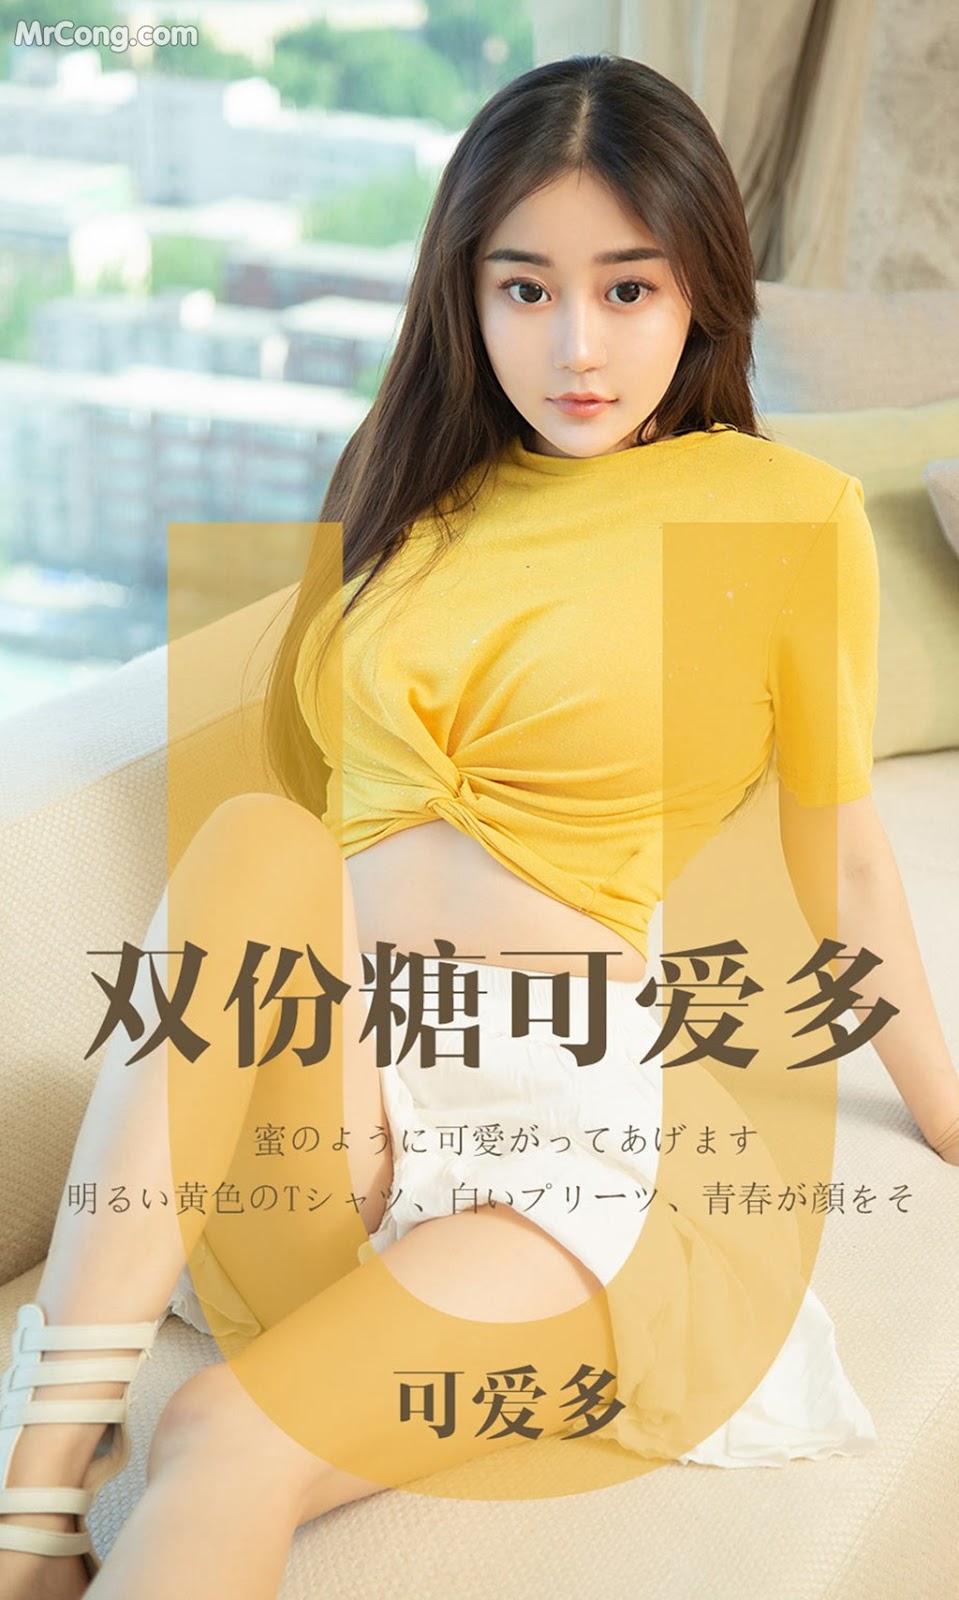 UGIRLS - Ai You Wu App No.1455: 可爱 多 (35 pictures) photo 1-0